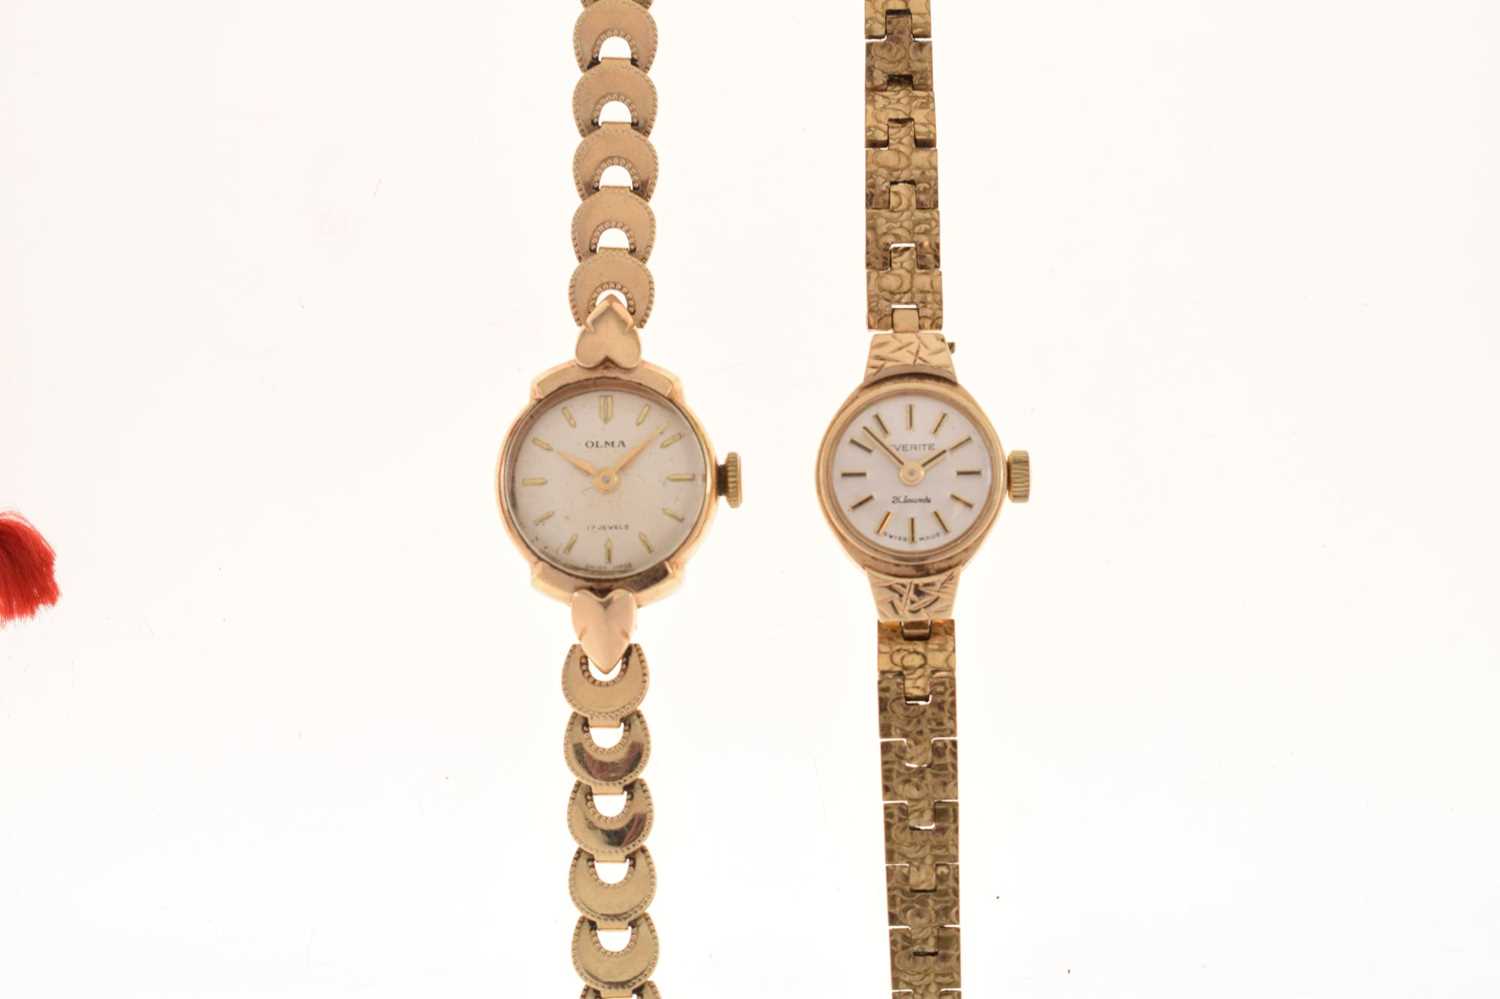 Olma - Lady's 9ct gold cocktail watch - Image 6 of 6